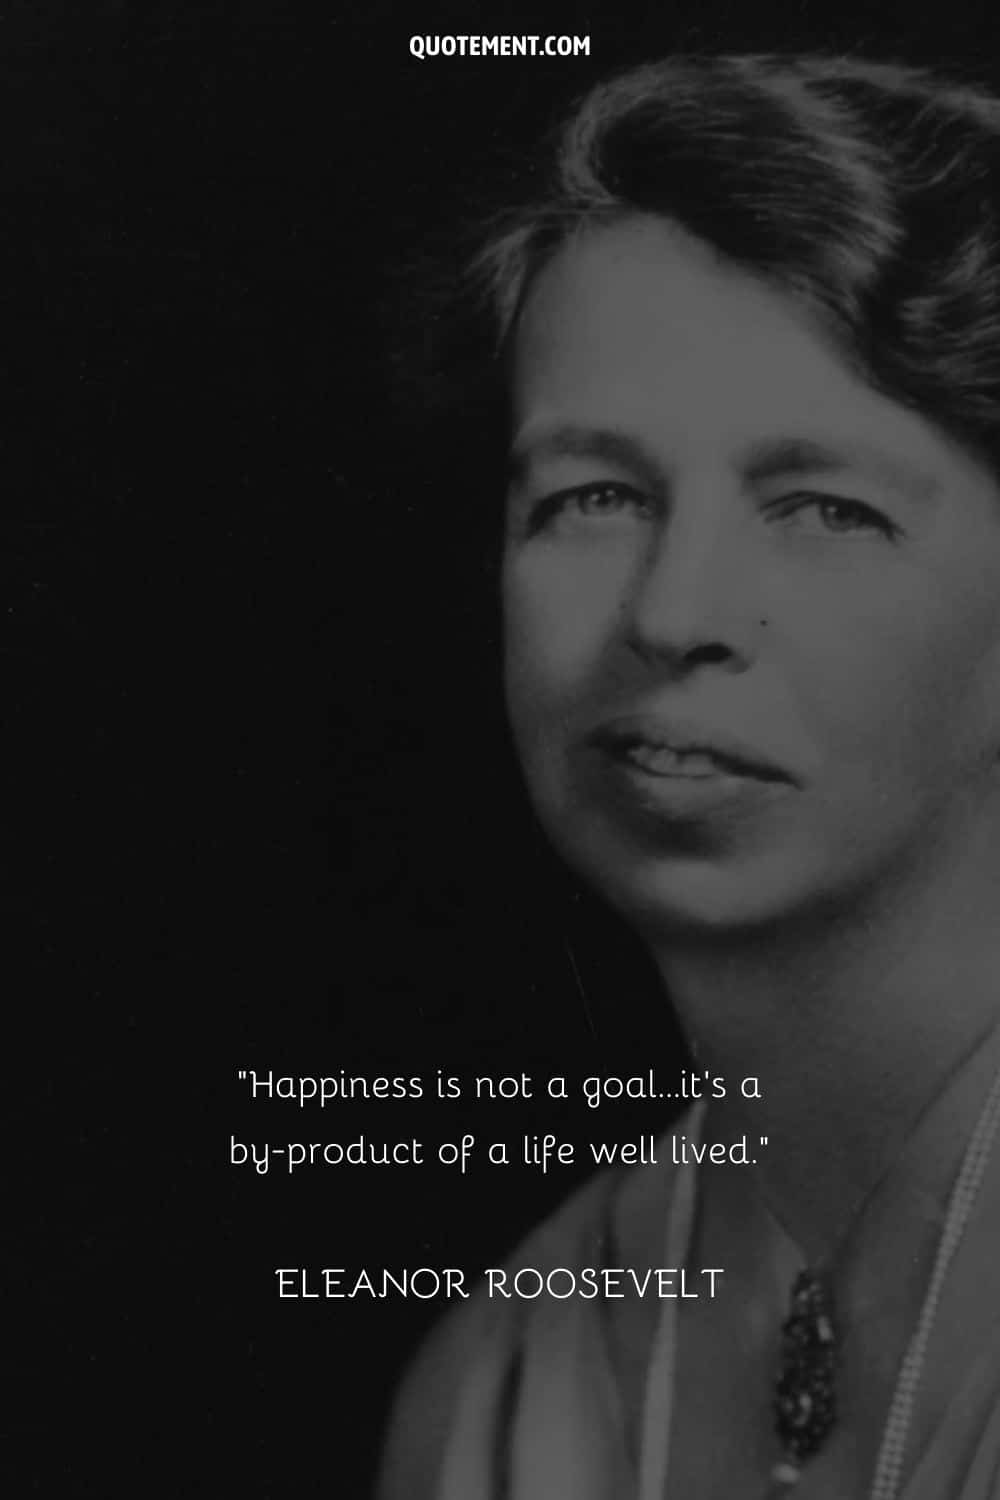 “Happiness is not a goal...it's a by-product of a life well lived.” ― Eleanor Roosevelt